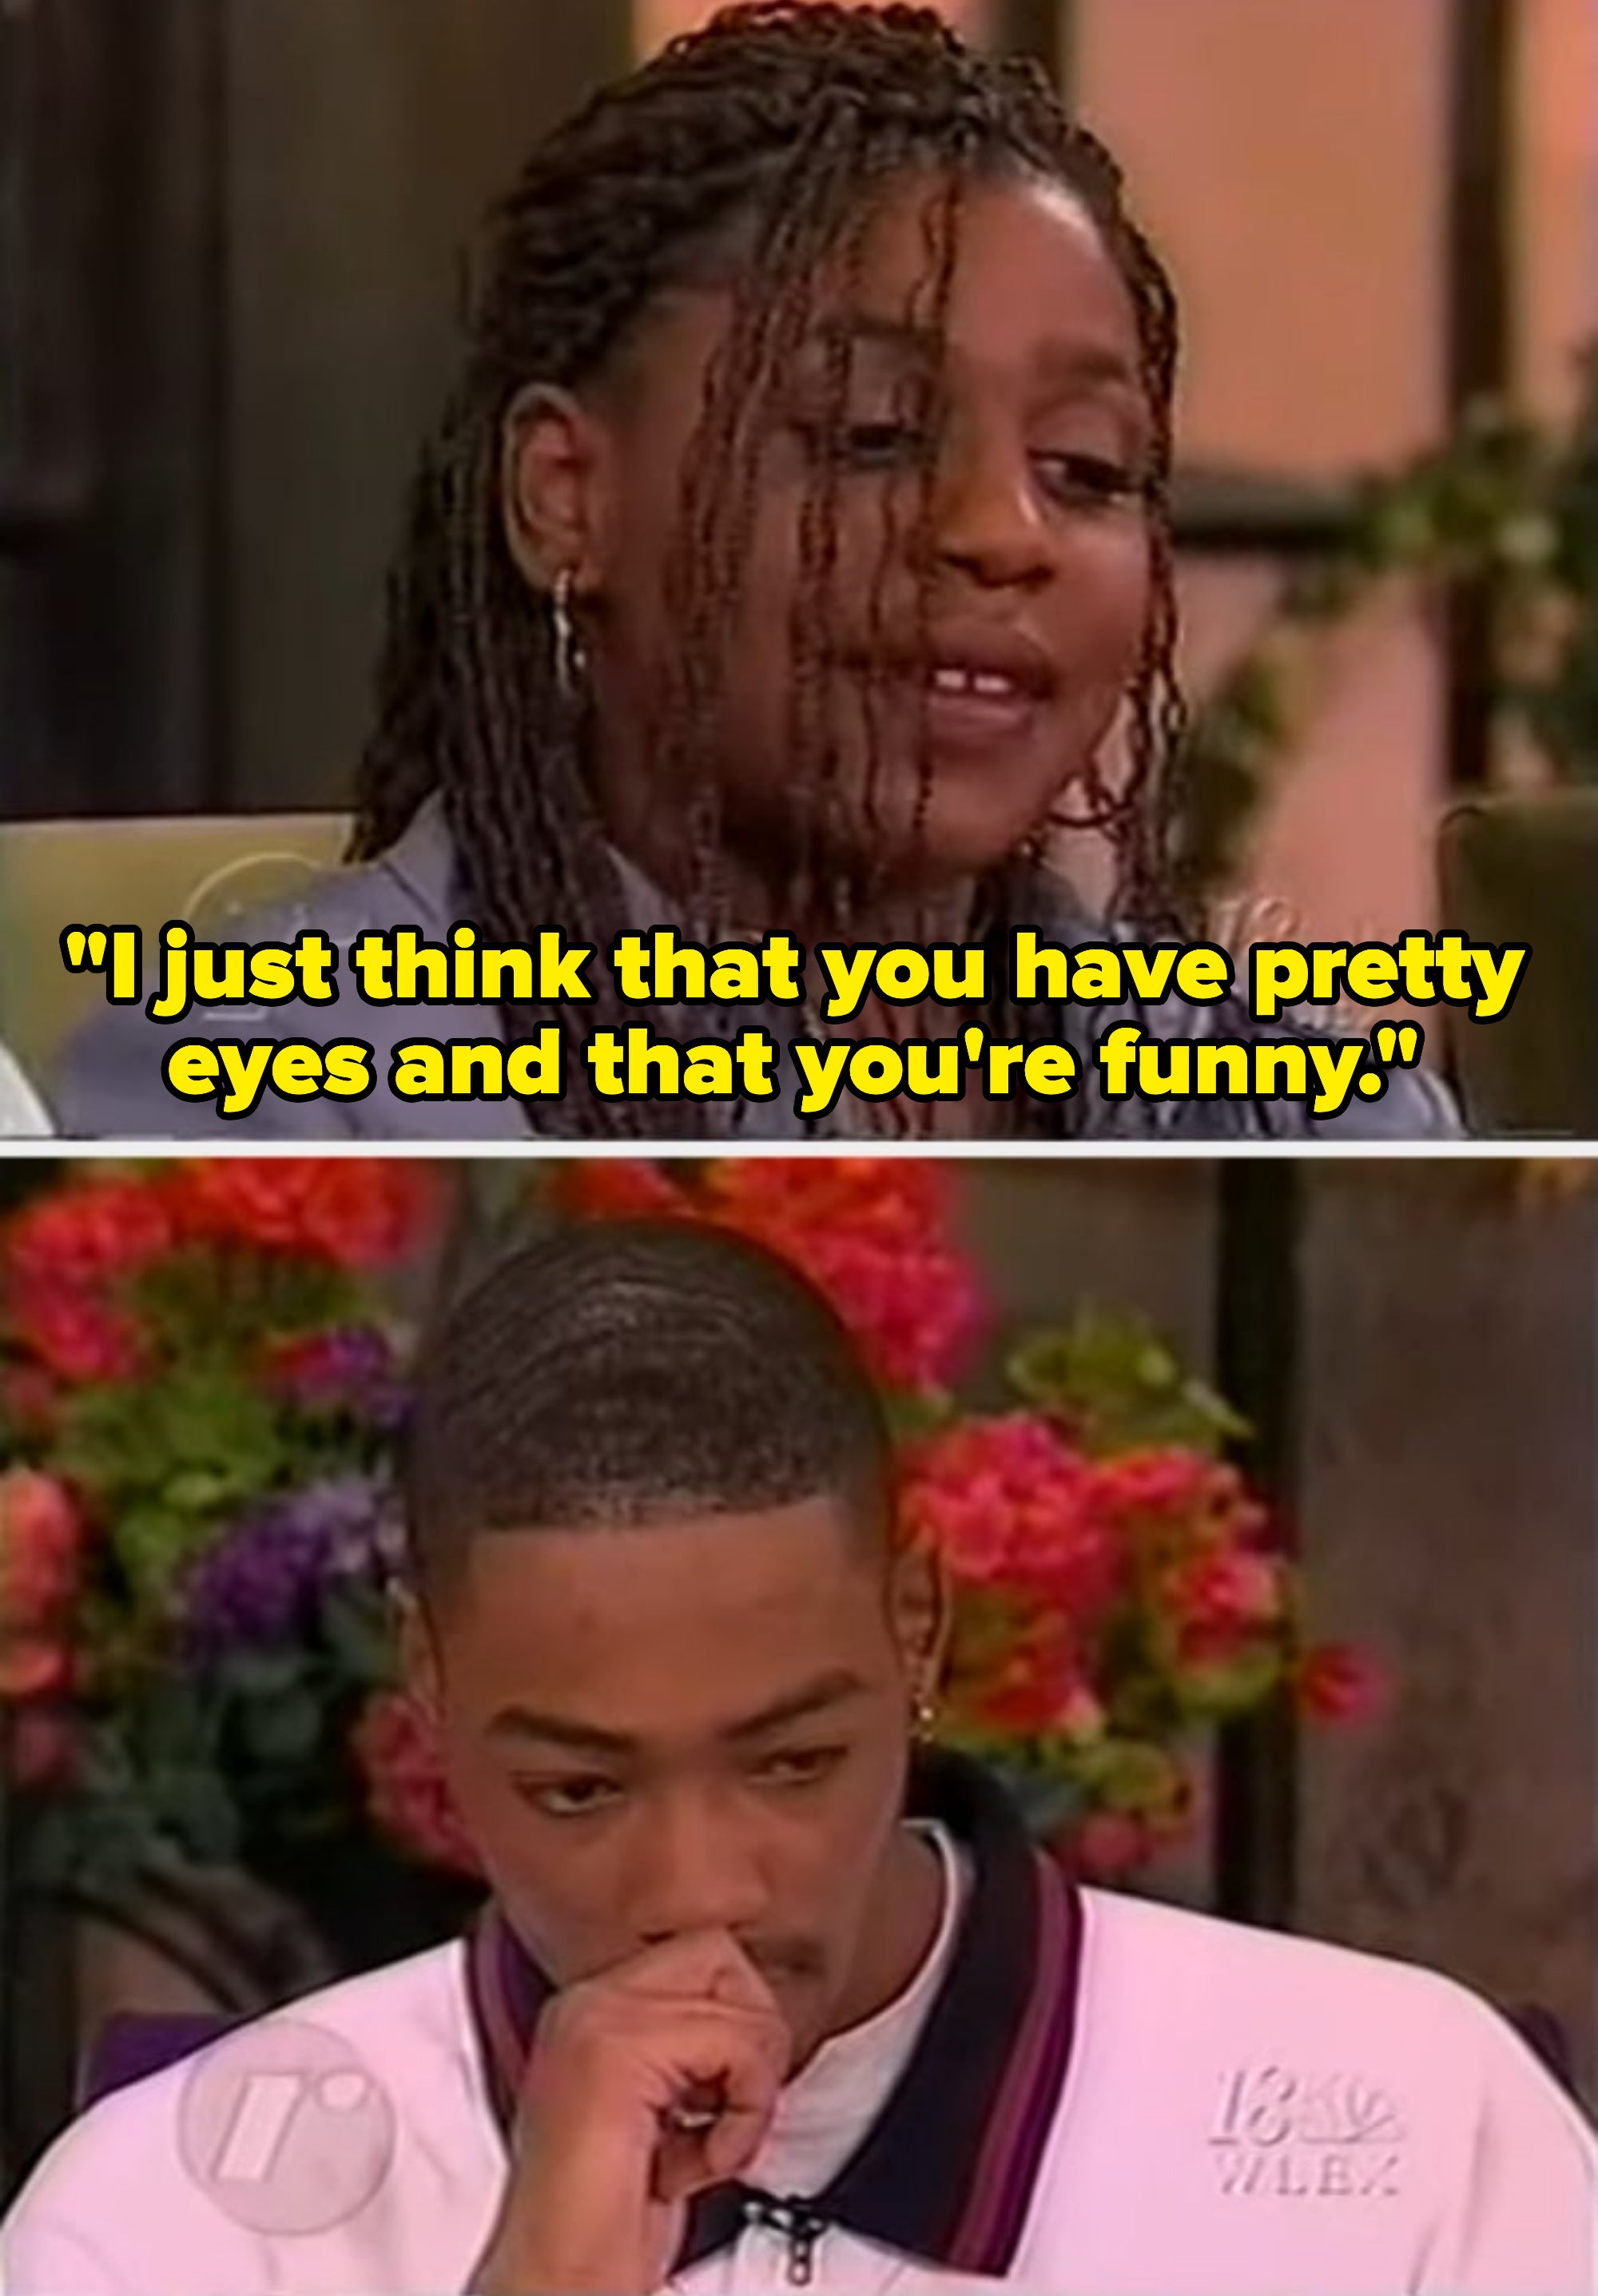 &quot;I just think that you have pretty eyes and that you&#x27;re funny.&quot;